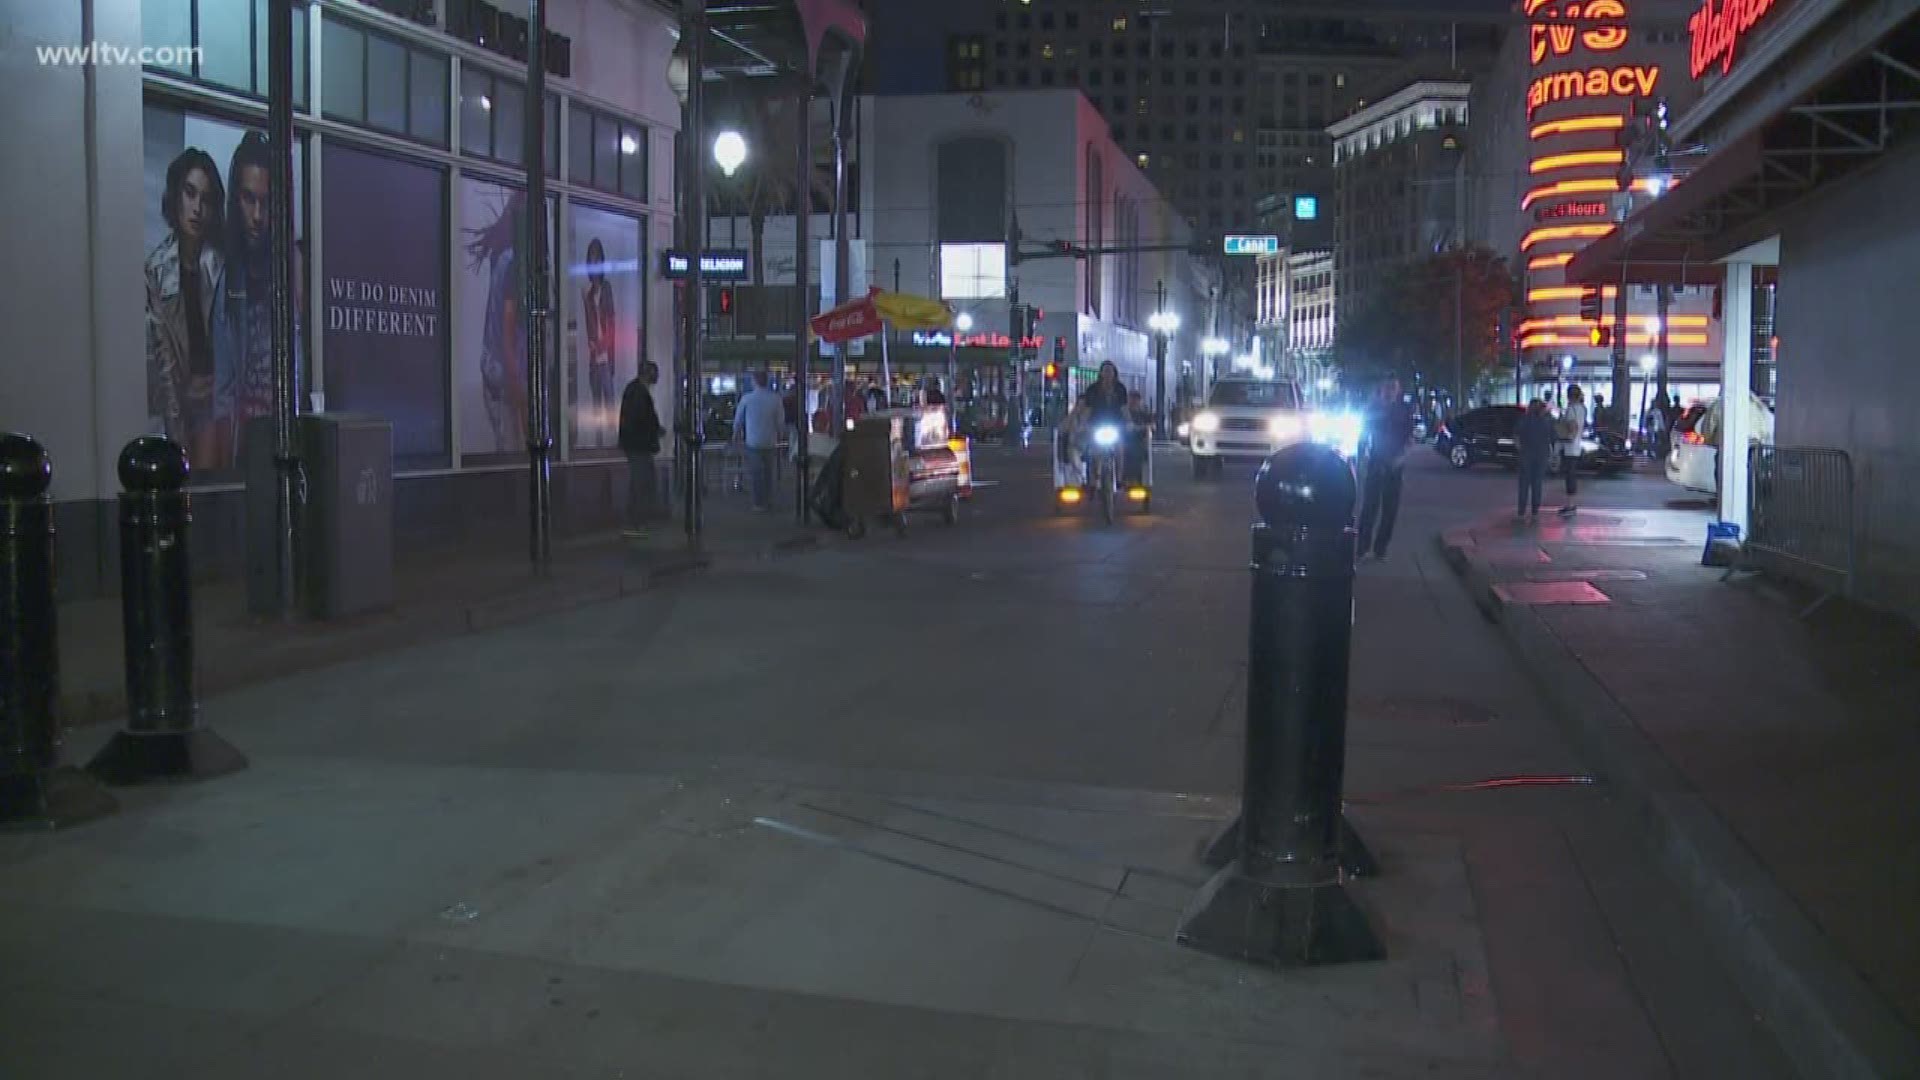 City officials are taking steps to protect pedestrians on one of the city's busiest streets.